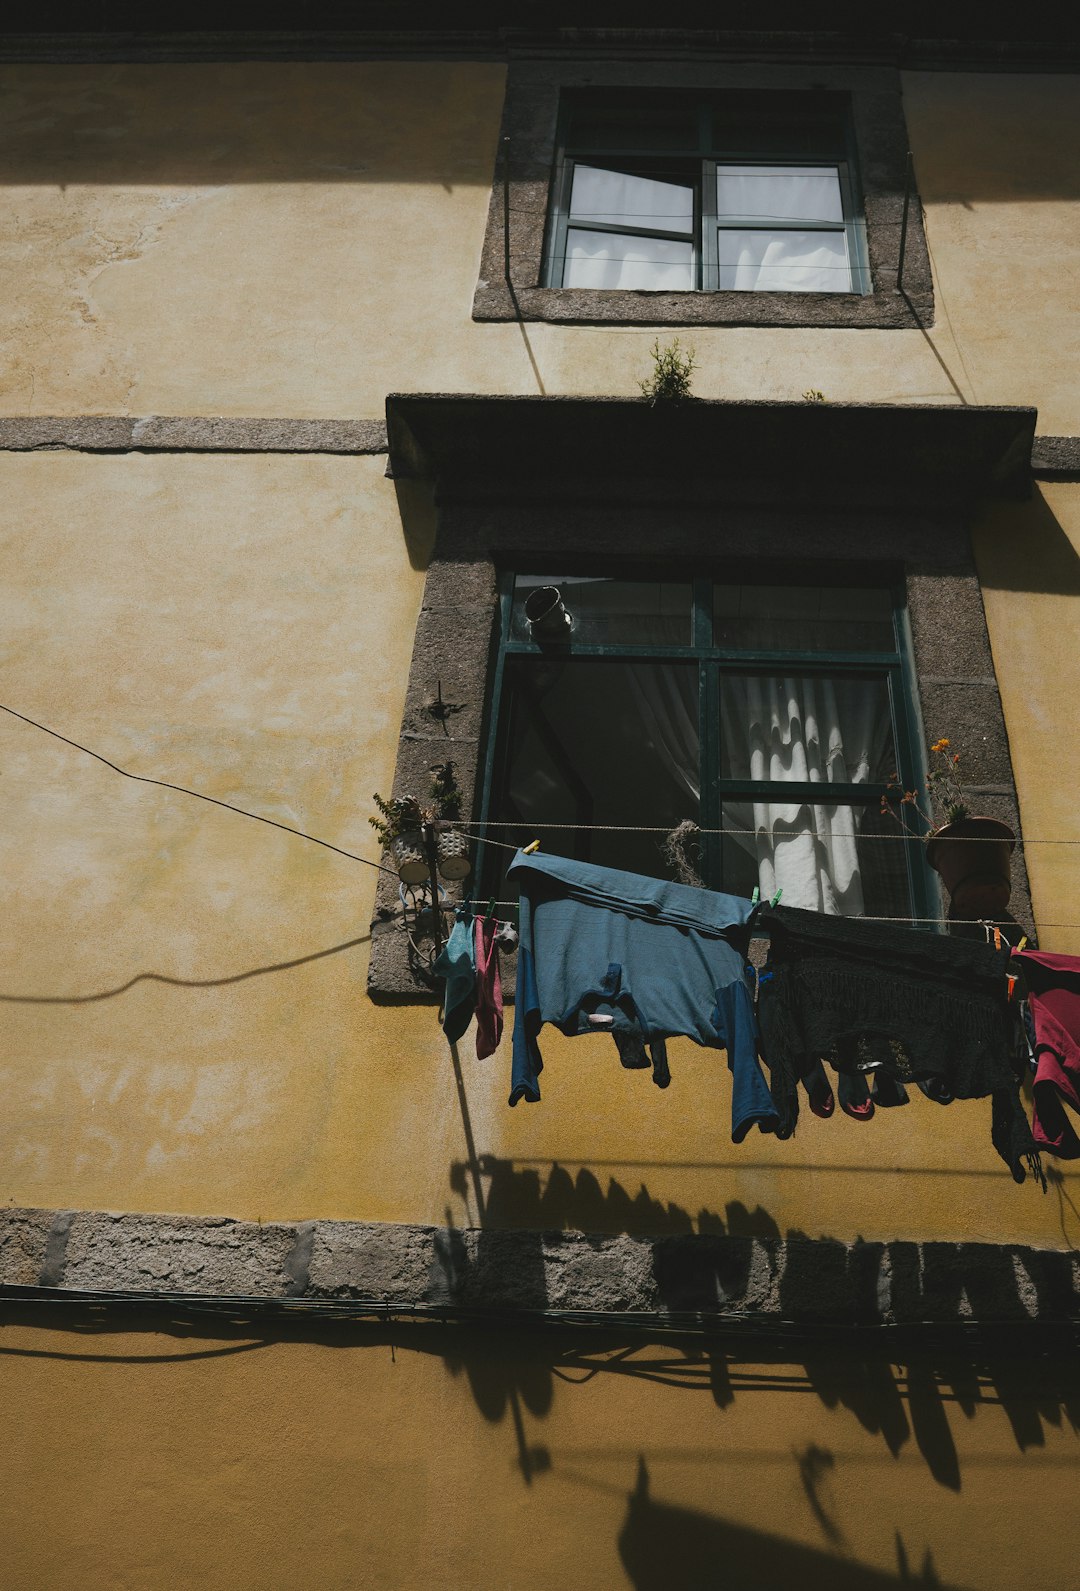 clothes hanged on string near window